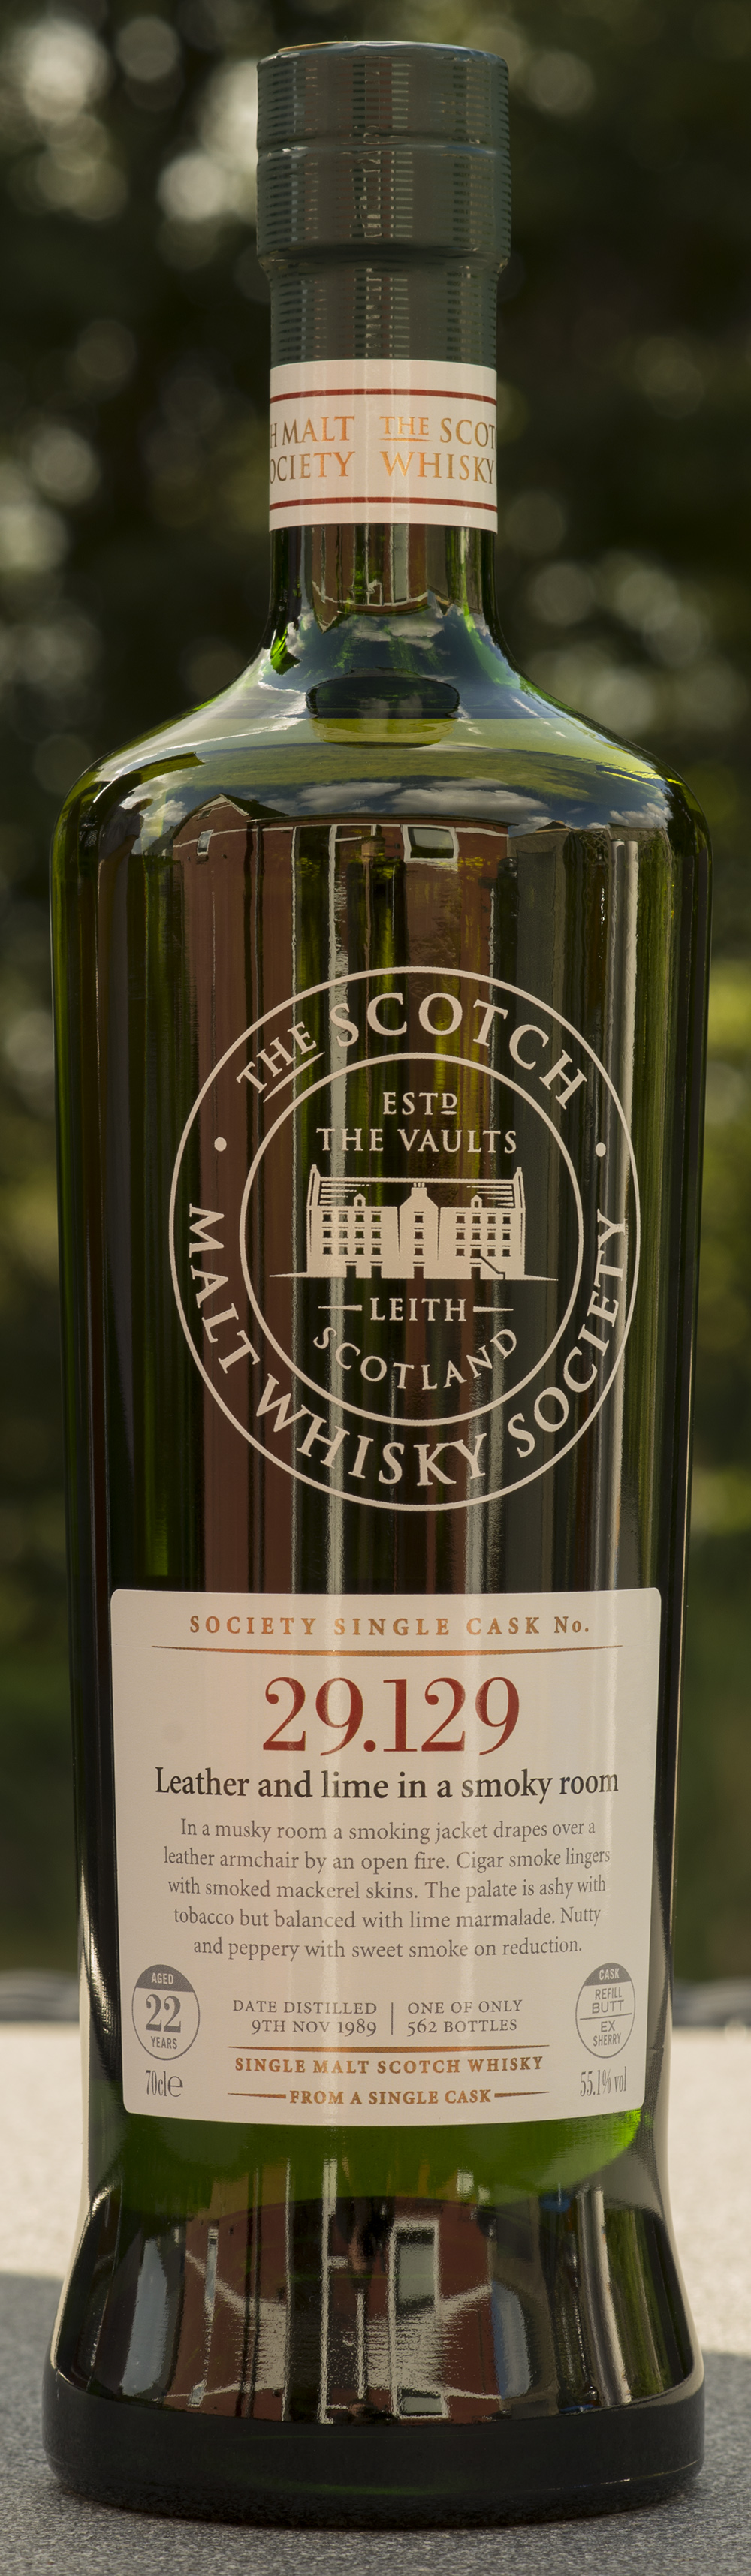 Billede: DSC_3341 SMWS 29.129 - Leather and lime in a smoky room - bottle front.jpg